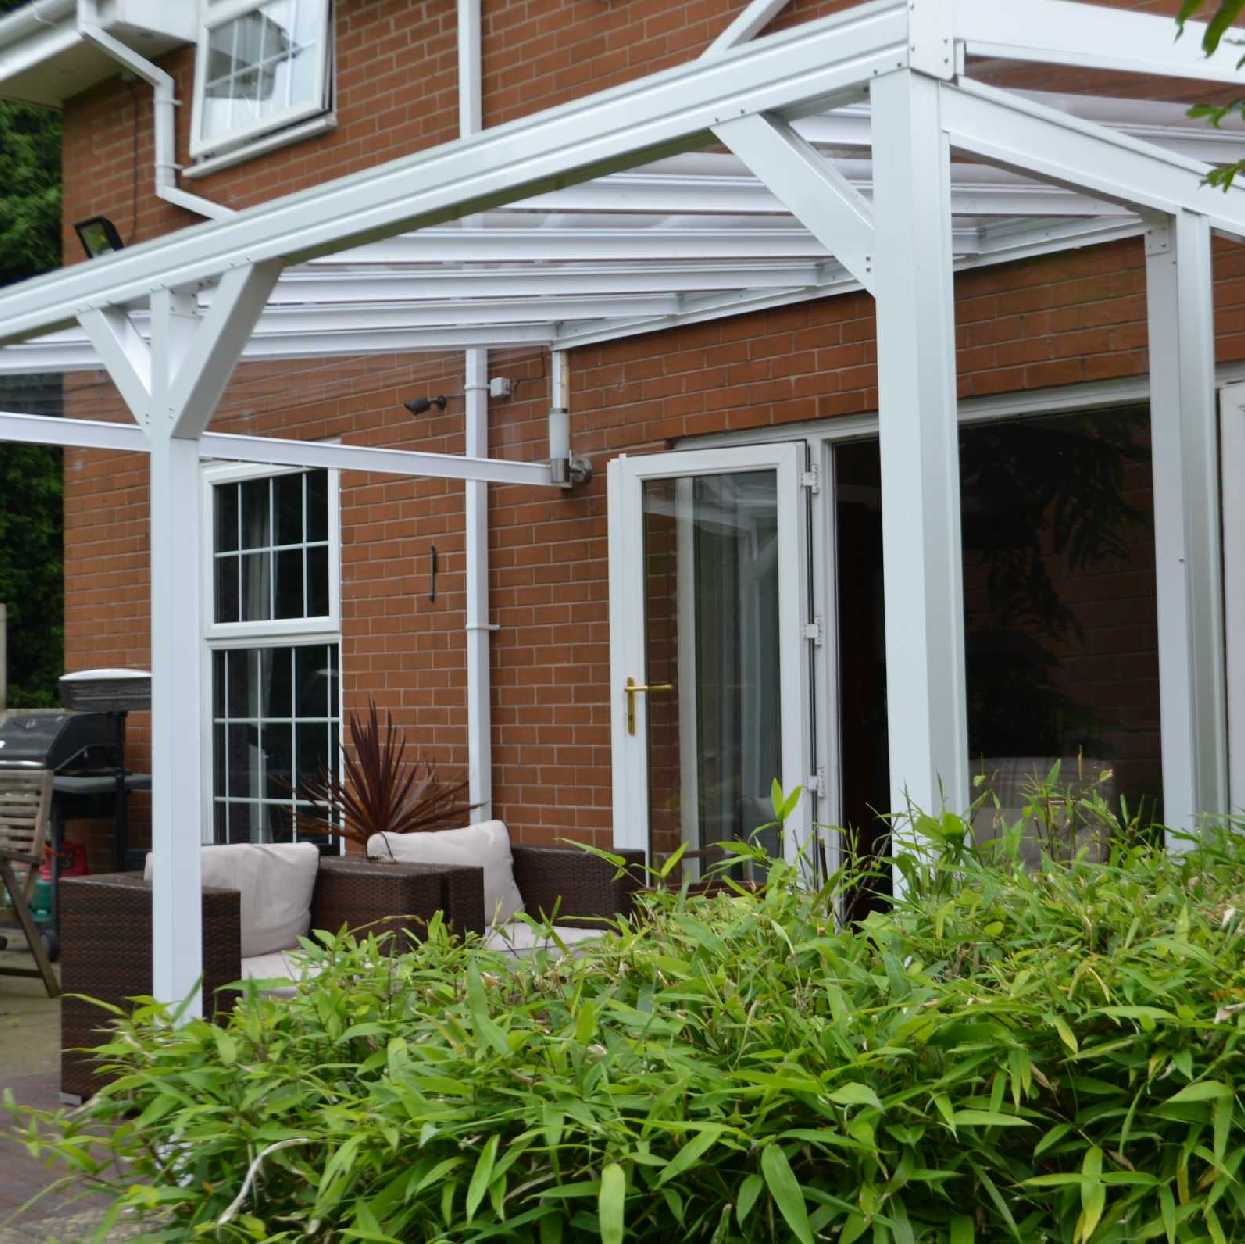 Omega Smart Lean-To Canopy, White UNGLAZED for 6mm Glazing - 7.0m (W) x 1.5m (P), (4) Supporting Posts from Omega Build